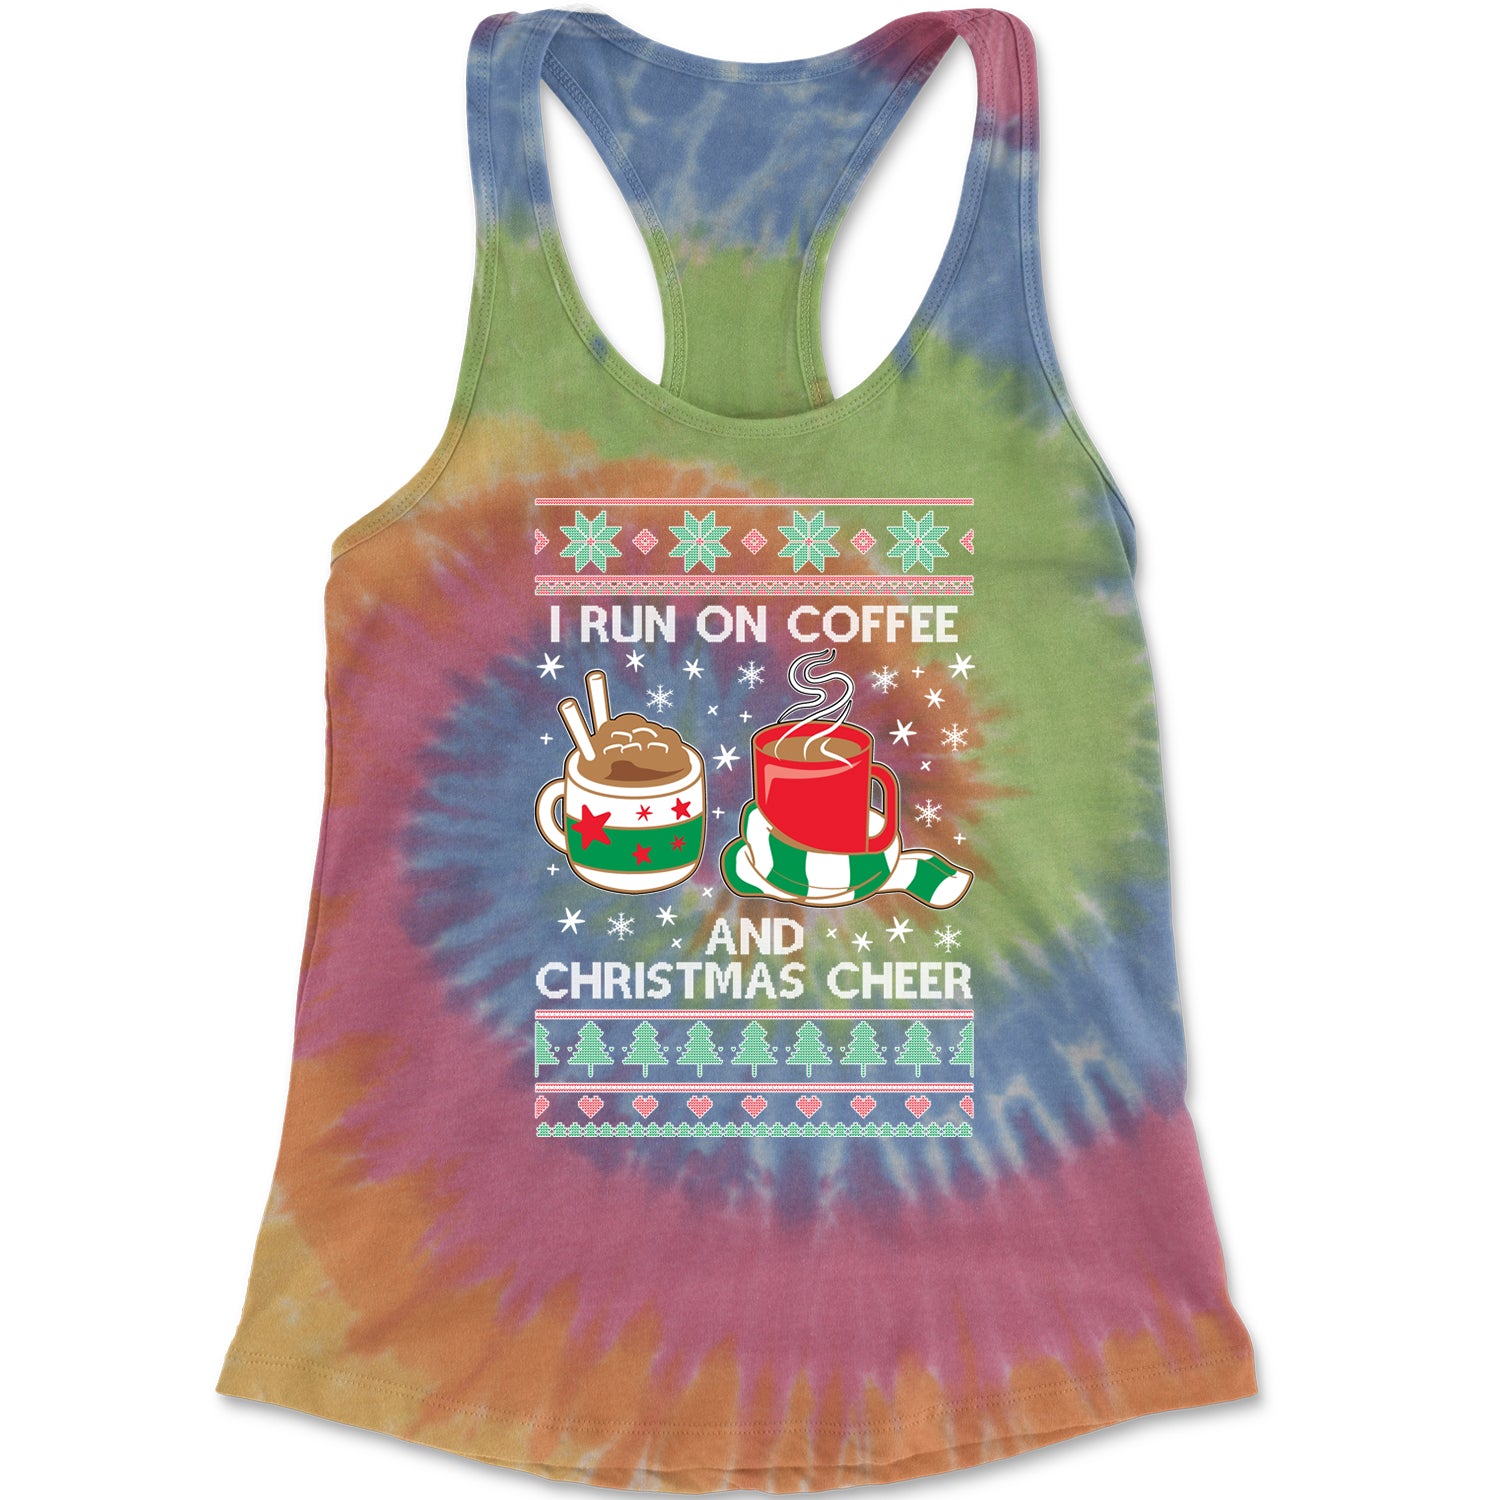 I Run On Coffee And Christmas Cheer Racerback Tank Top for Women christmas, sweater, sweatshirt, ugly by Expression Tees